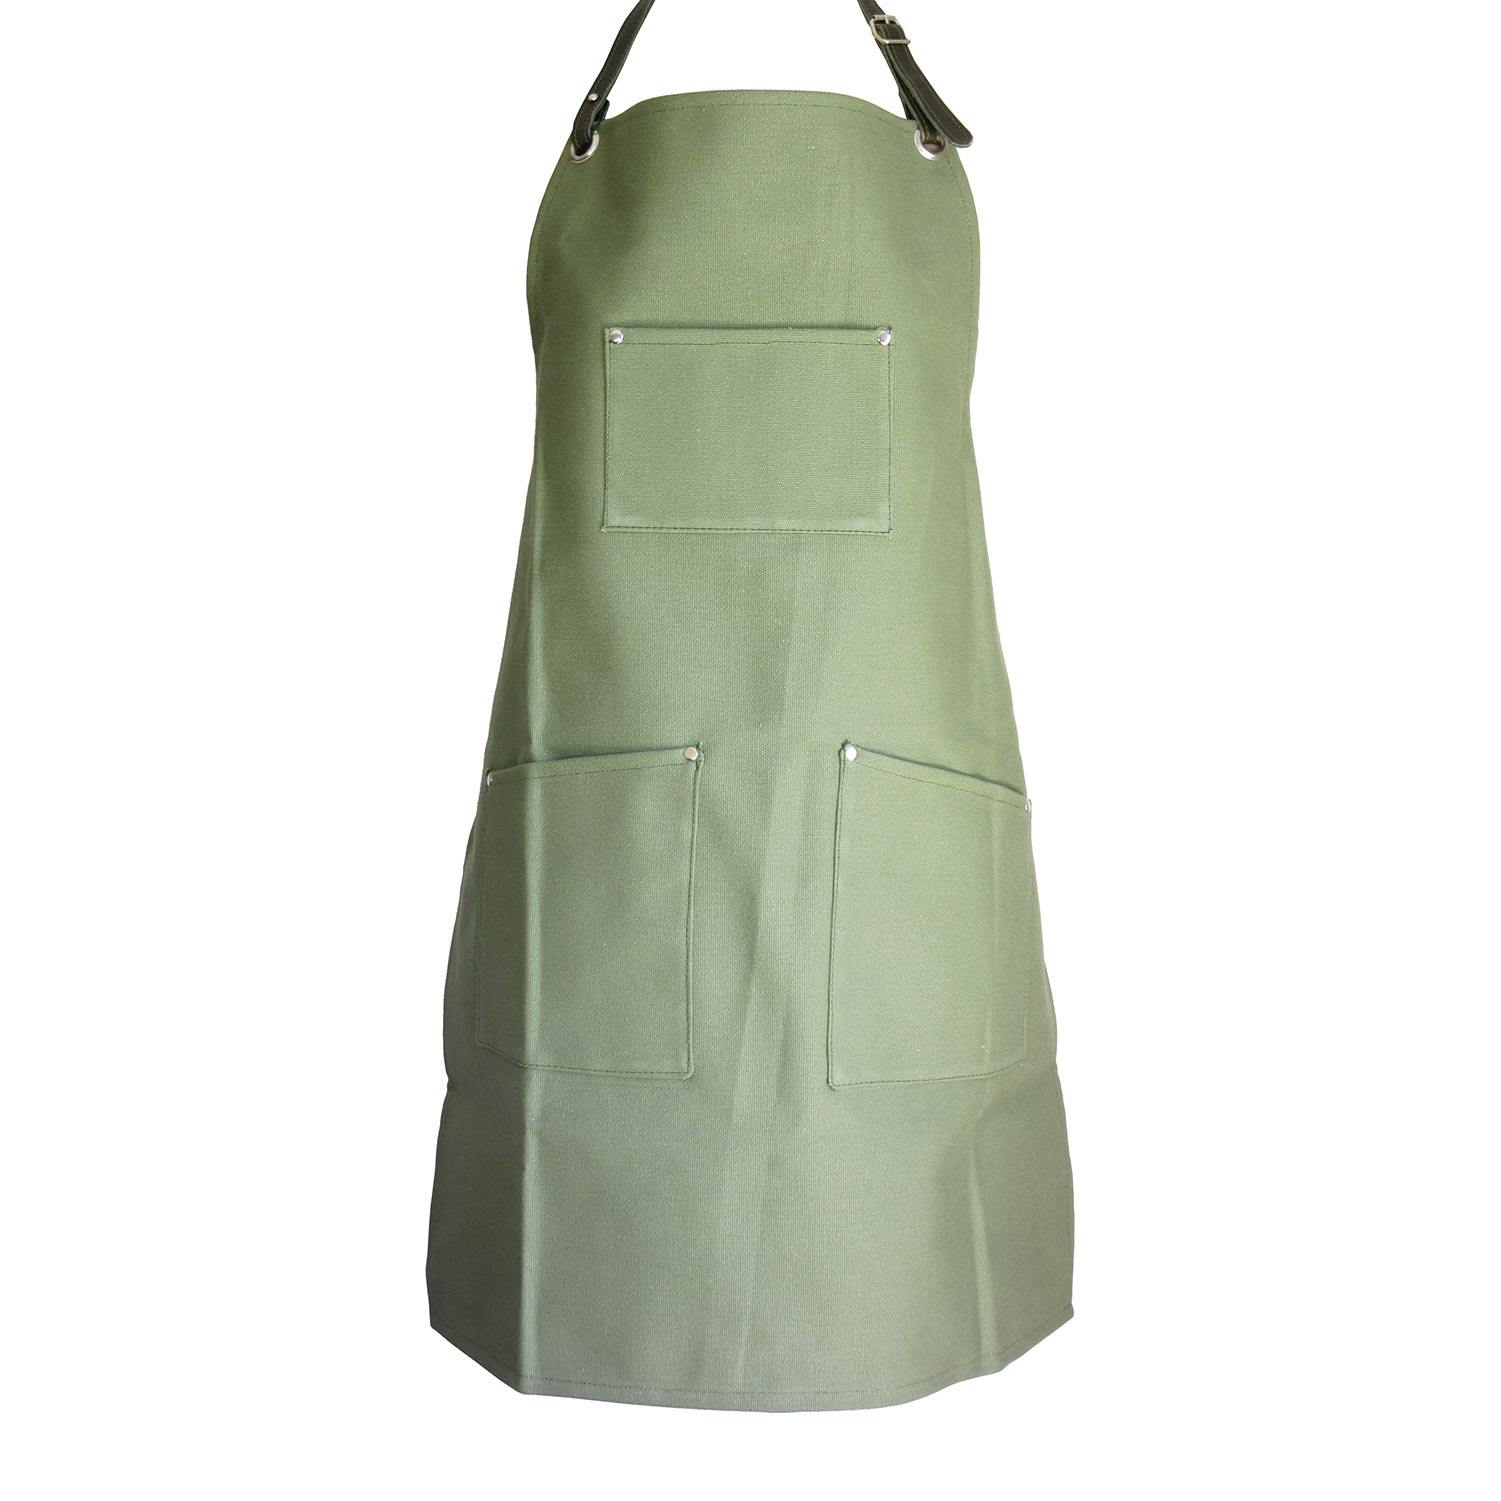 Woodheads Workmen's Canvas & Leather Aprons clothing & accessories Woodheads green